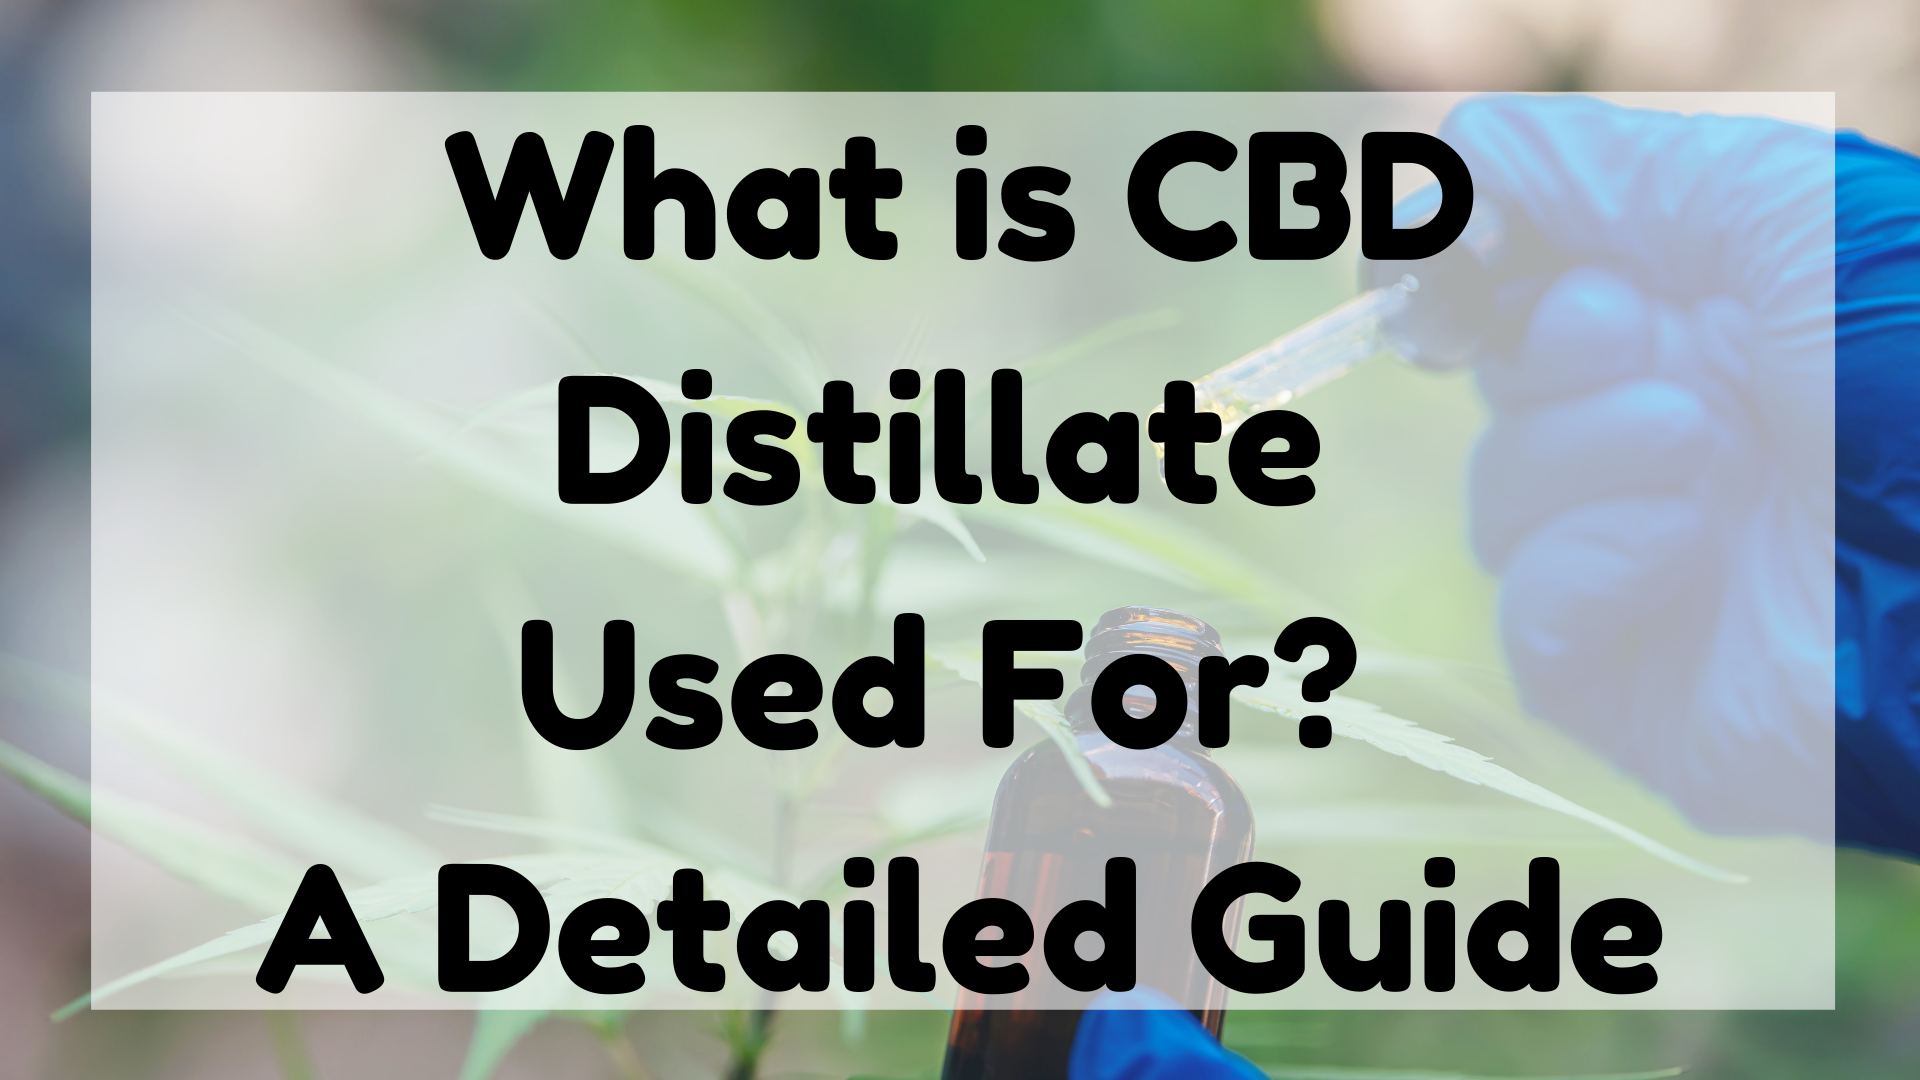 What is CBD Distillate Used for?